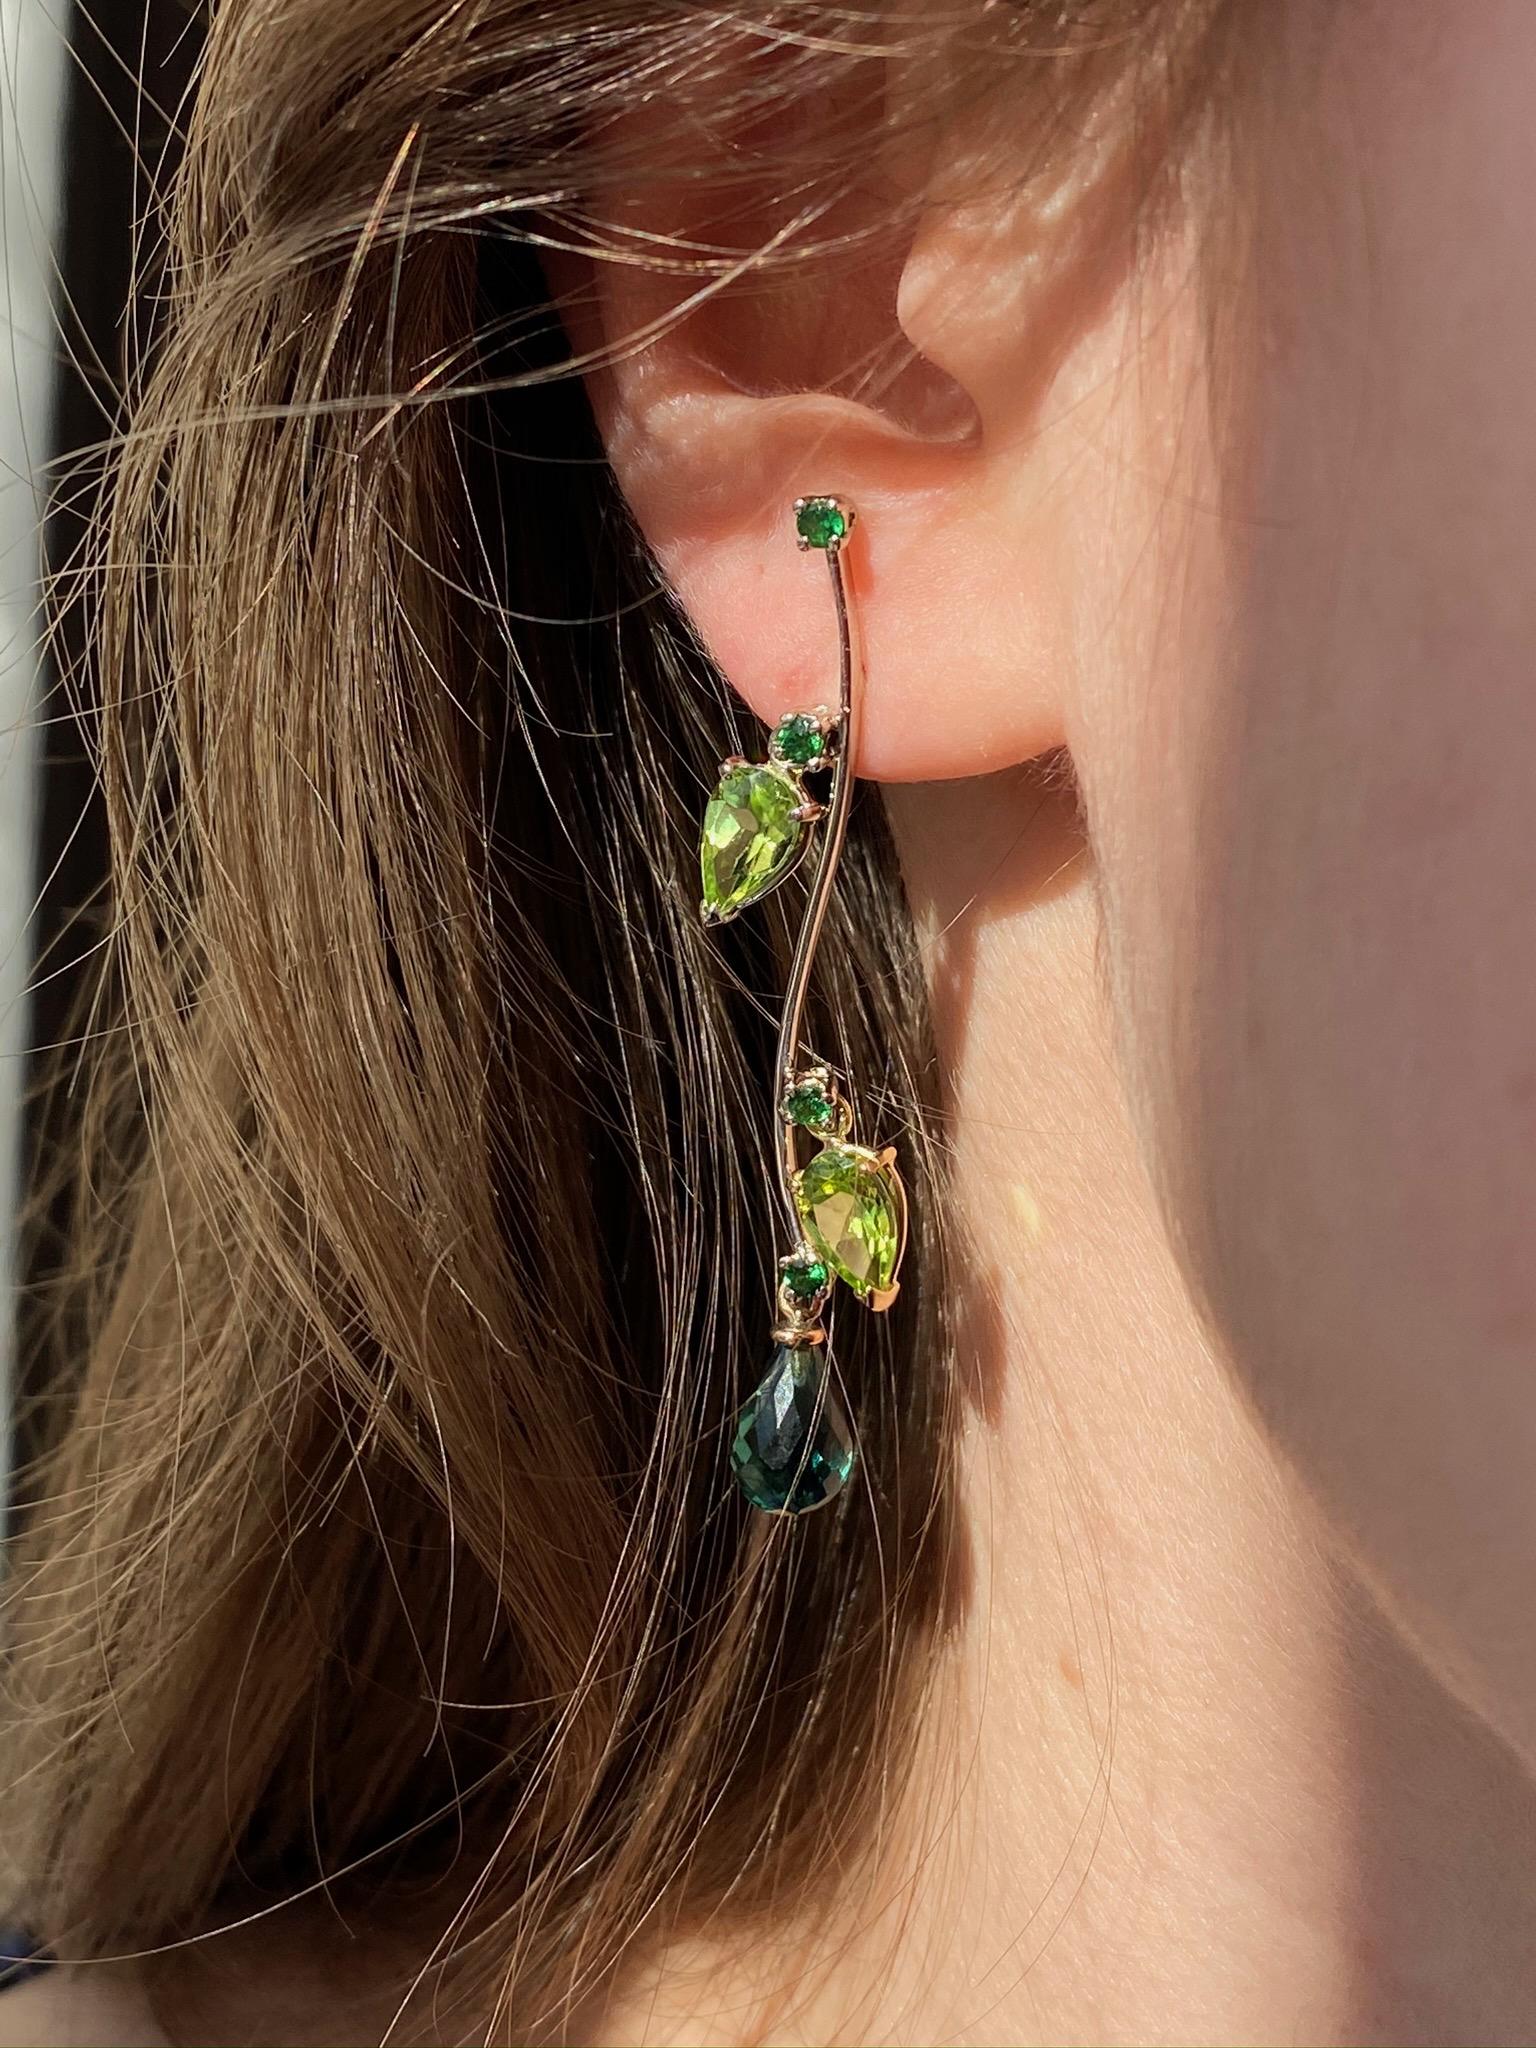 Rossella Ugolini Design Collection a Modern Style dangle earrings handcrafted in 18 Karats Gold with three shade of green colors:  Peridot pear cut,  Tsavorite round cut , green Zircon Briolet drops.  The branches of the trees of Villa Borghese in